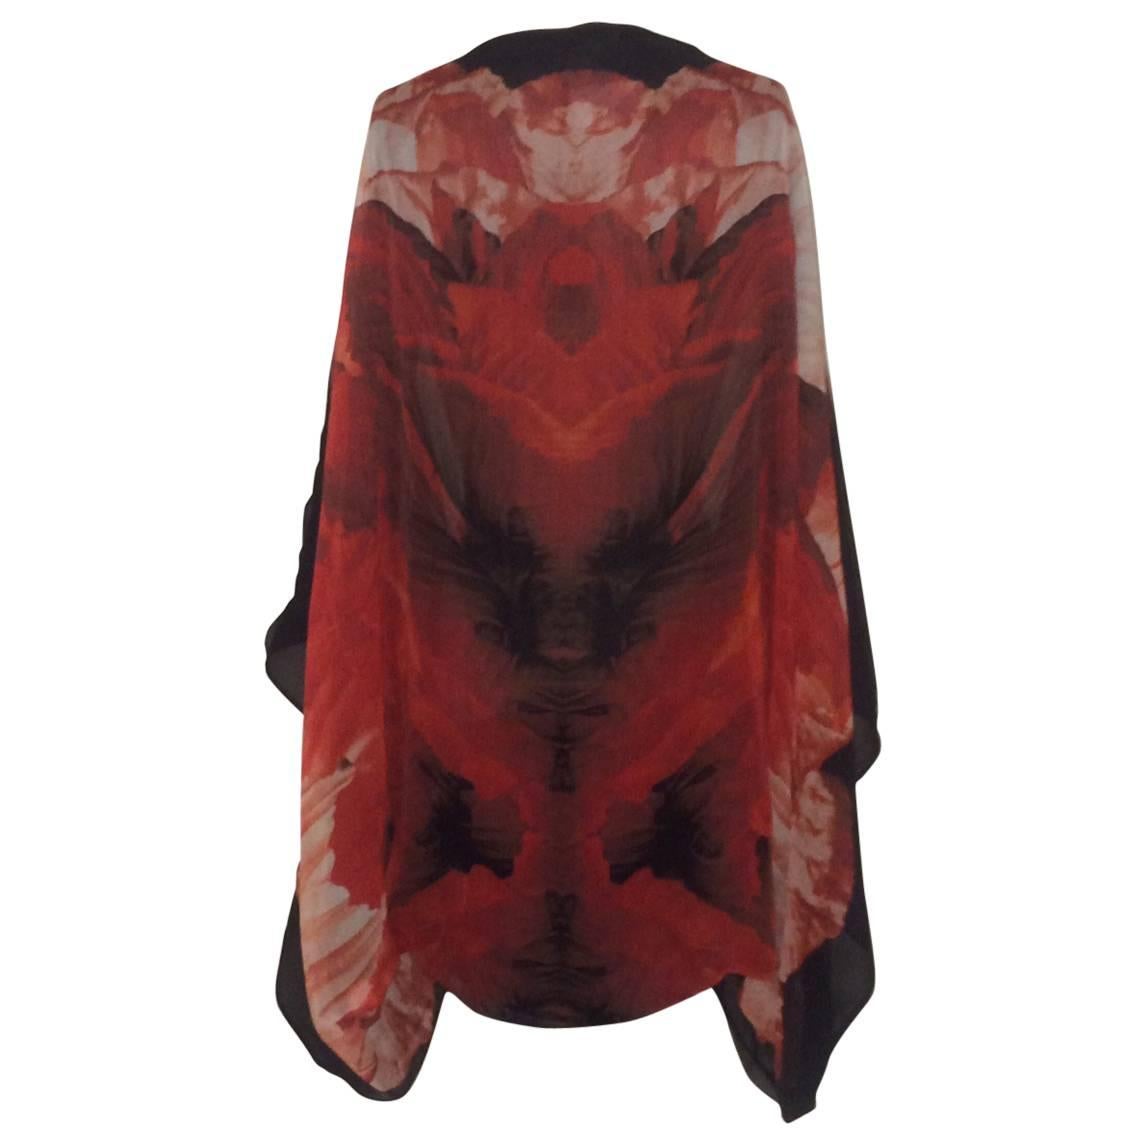 New Alexander McQueen Black and Red Silk Floral Cocoon Shawl Wrap with Tags